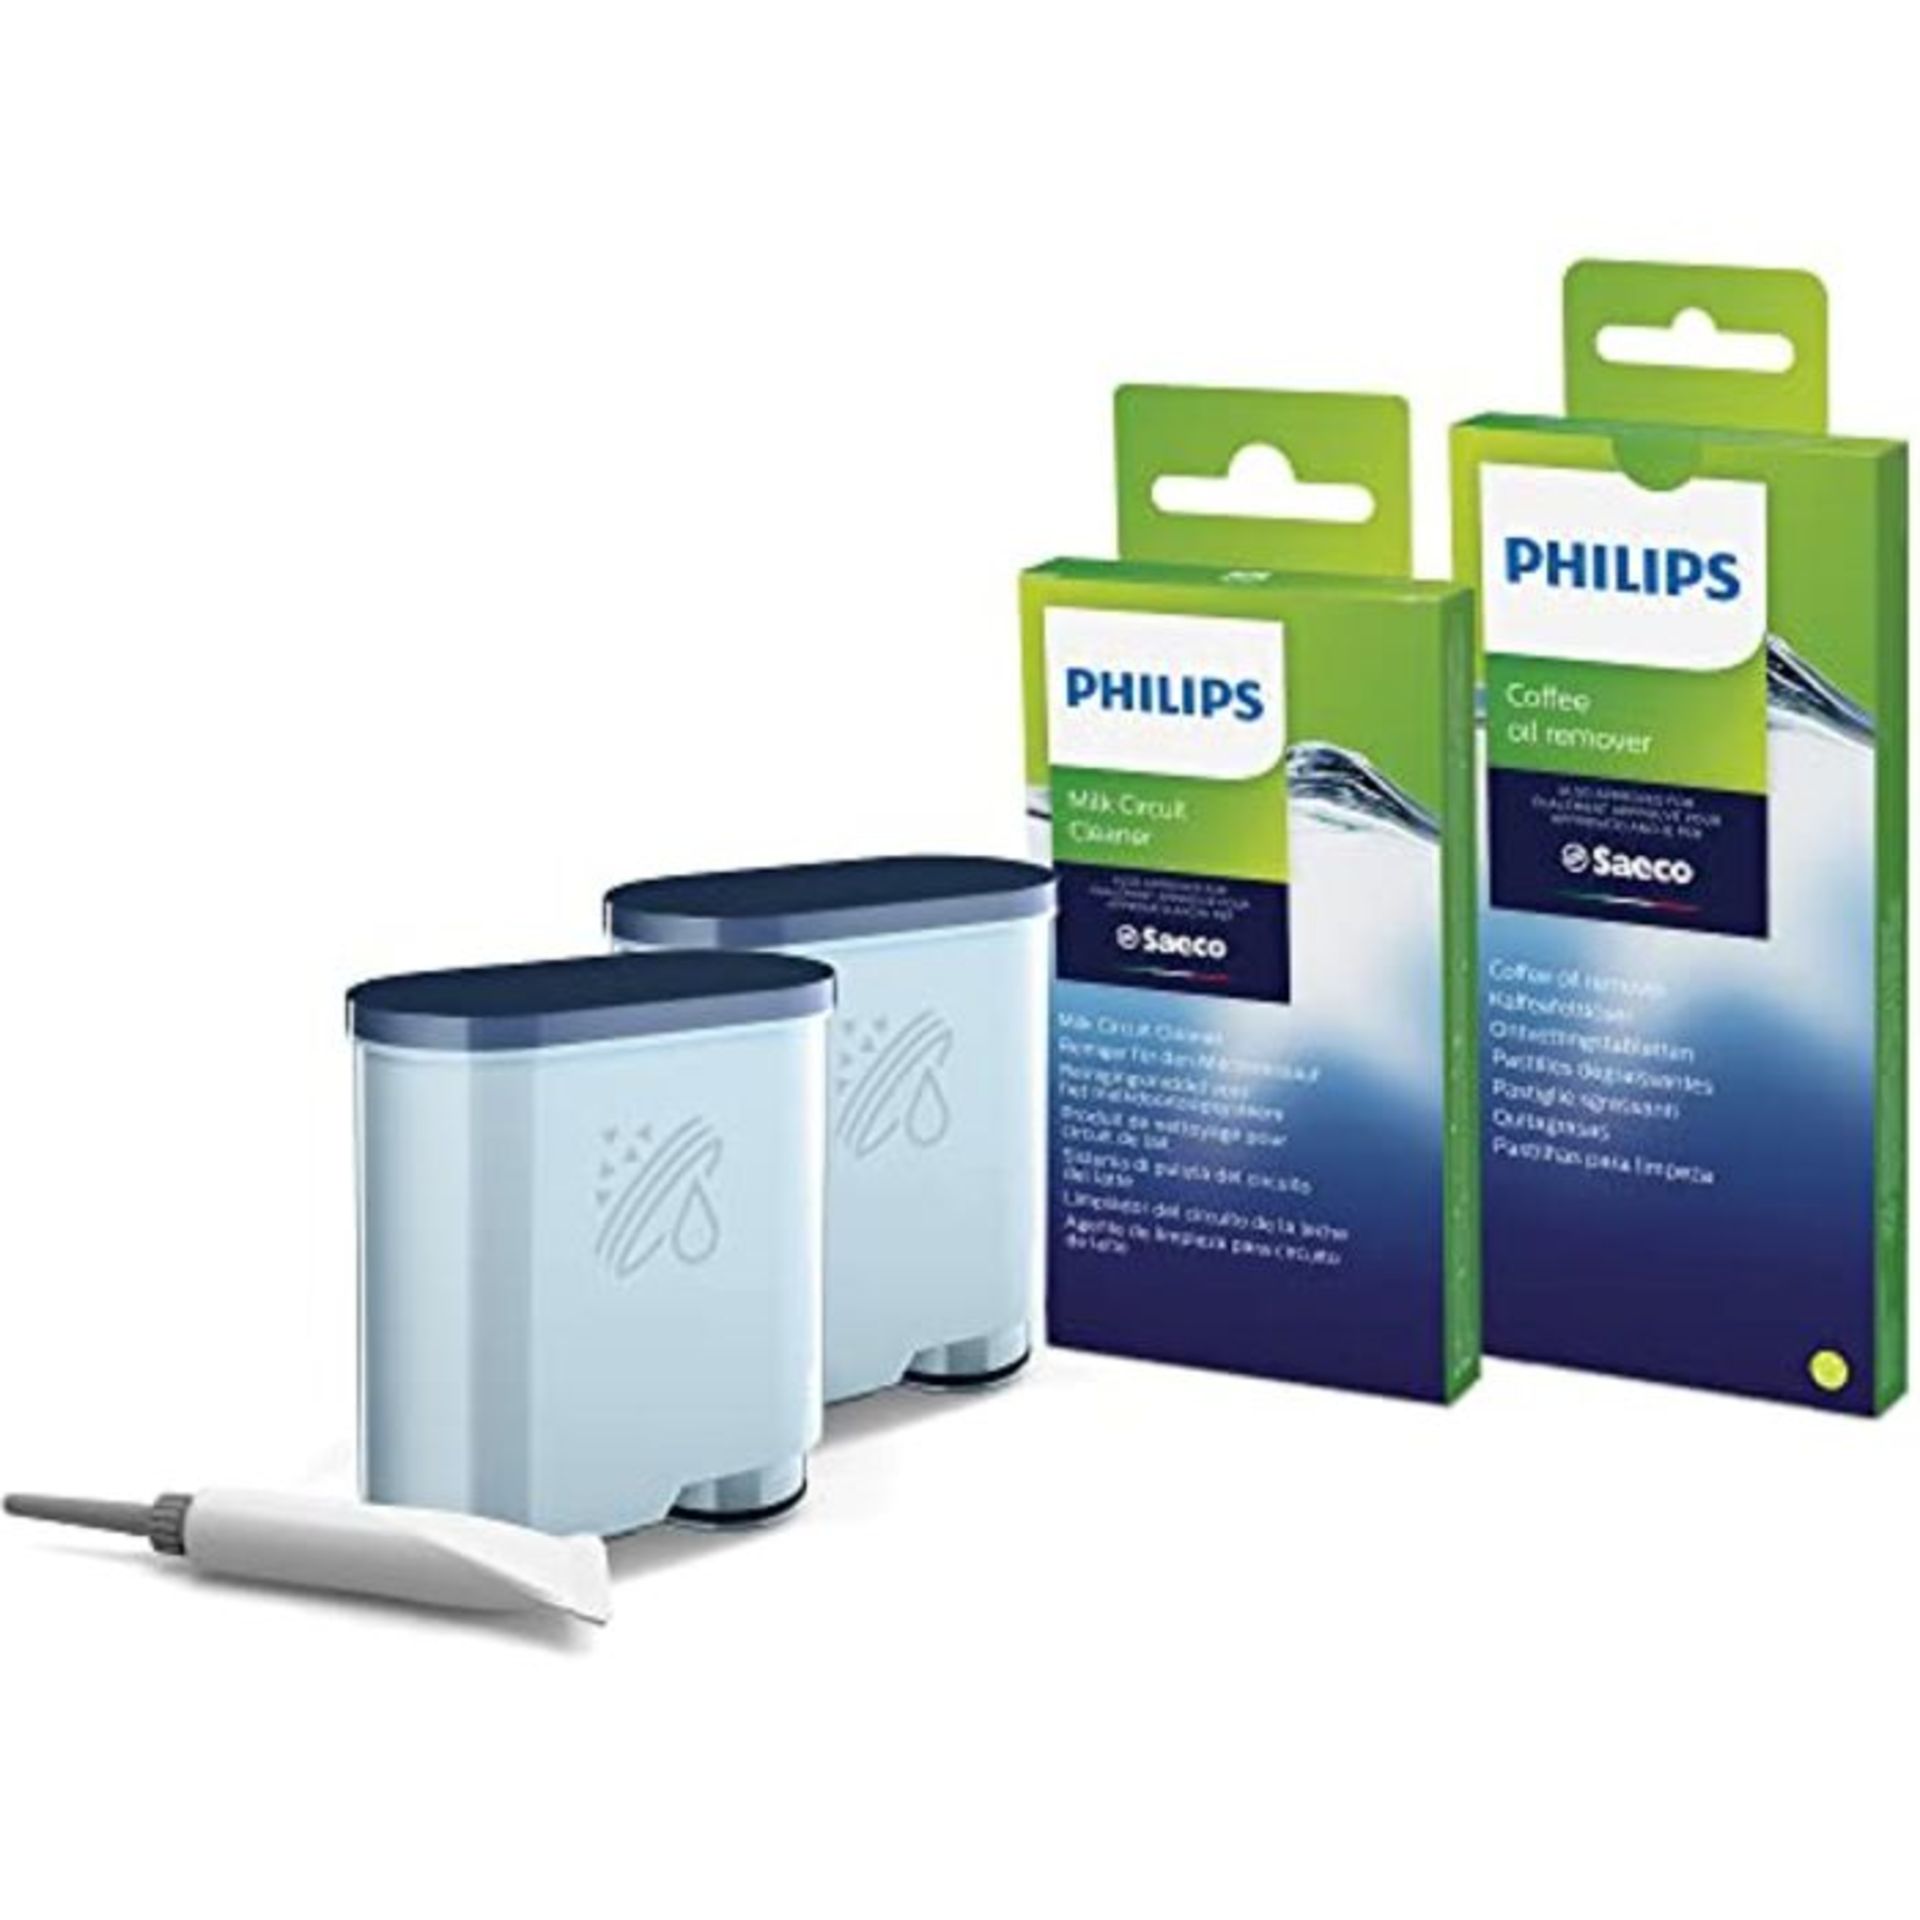 Philips AquaClean Water Filter for Saeco and Philips Fully Automatic Coffee Machines C